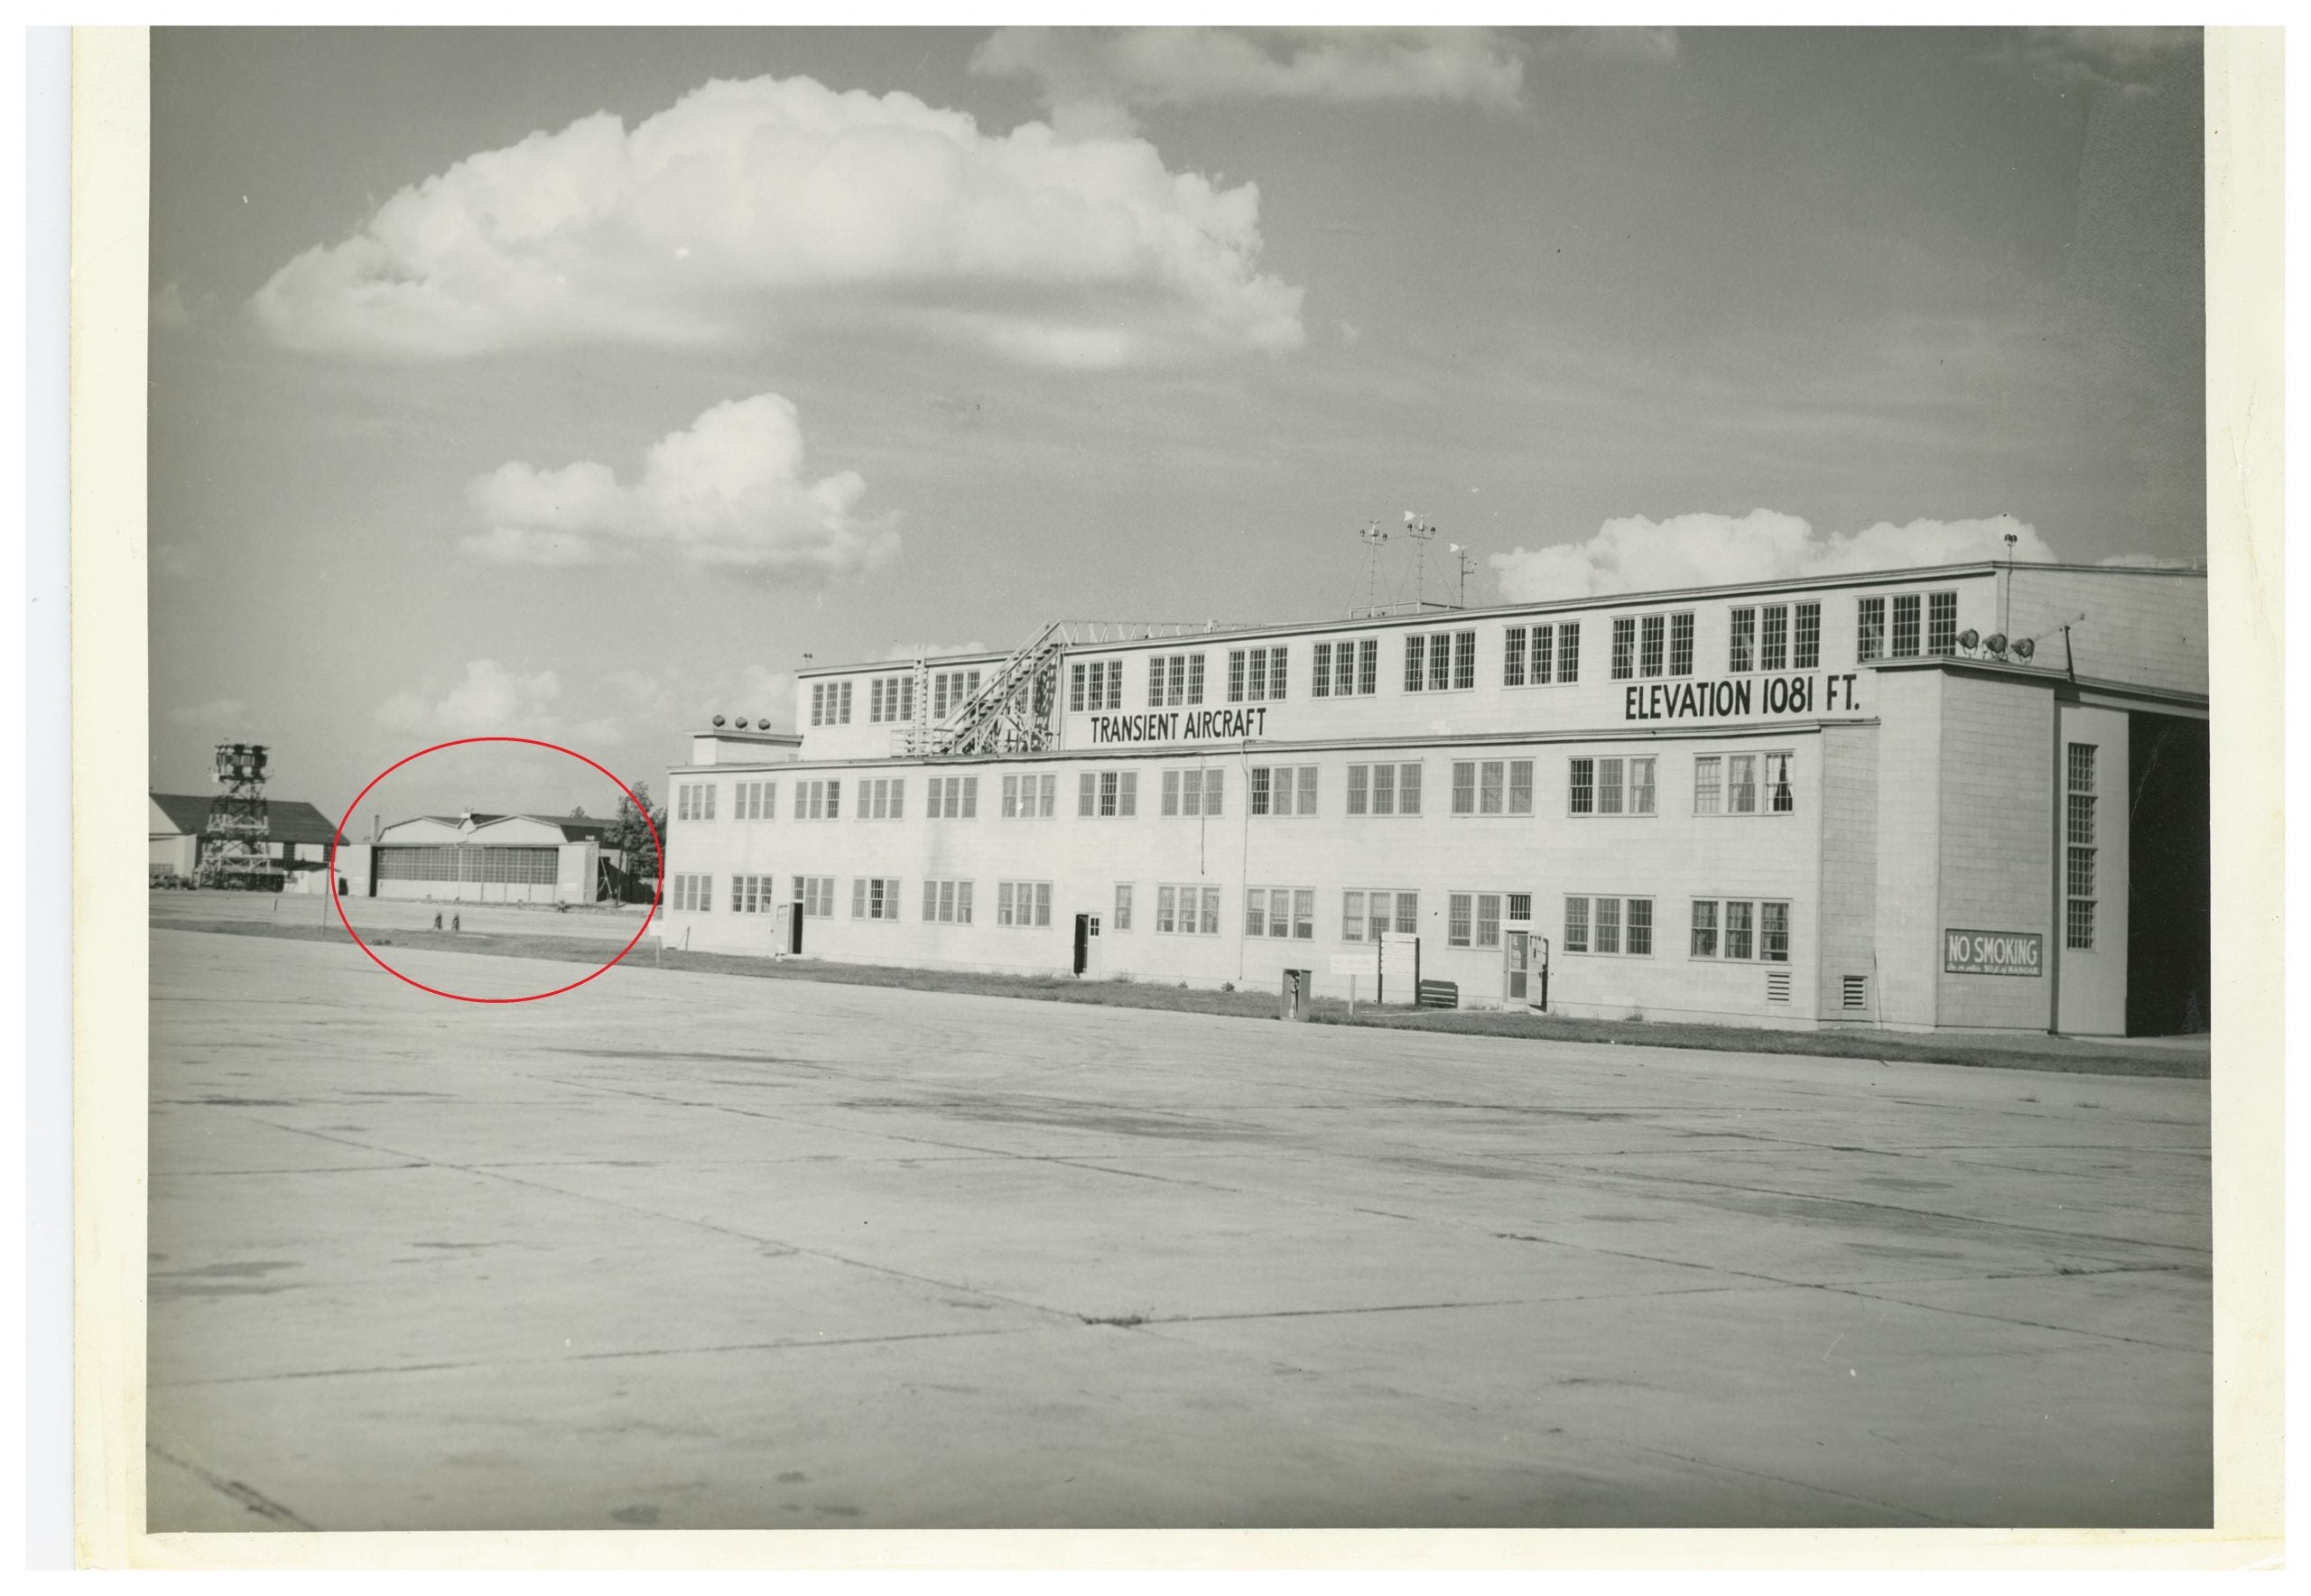 A look at the hangar at Tullahoma Reginal Airport (in the red circle) in 1942.